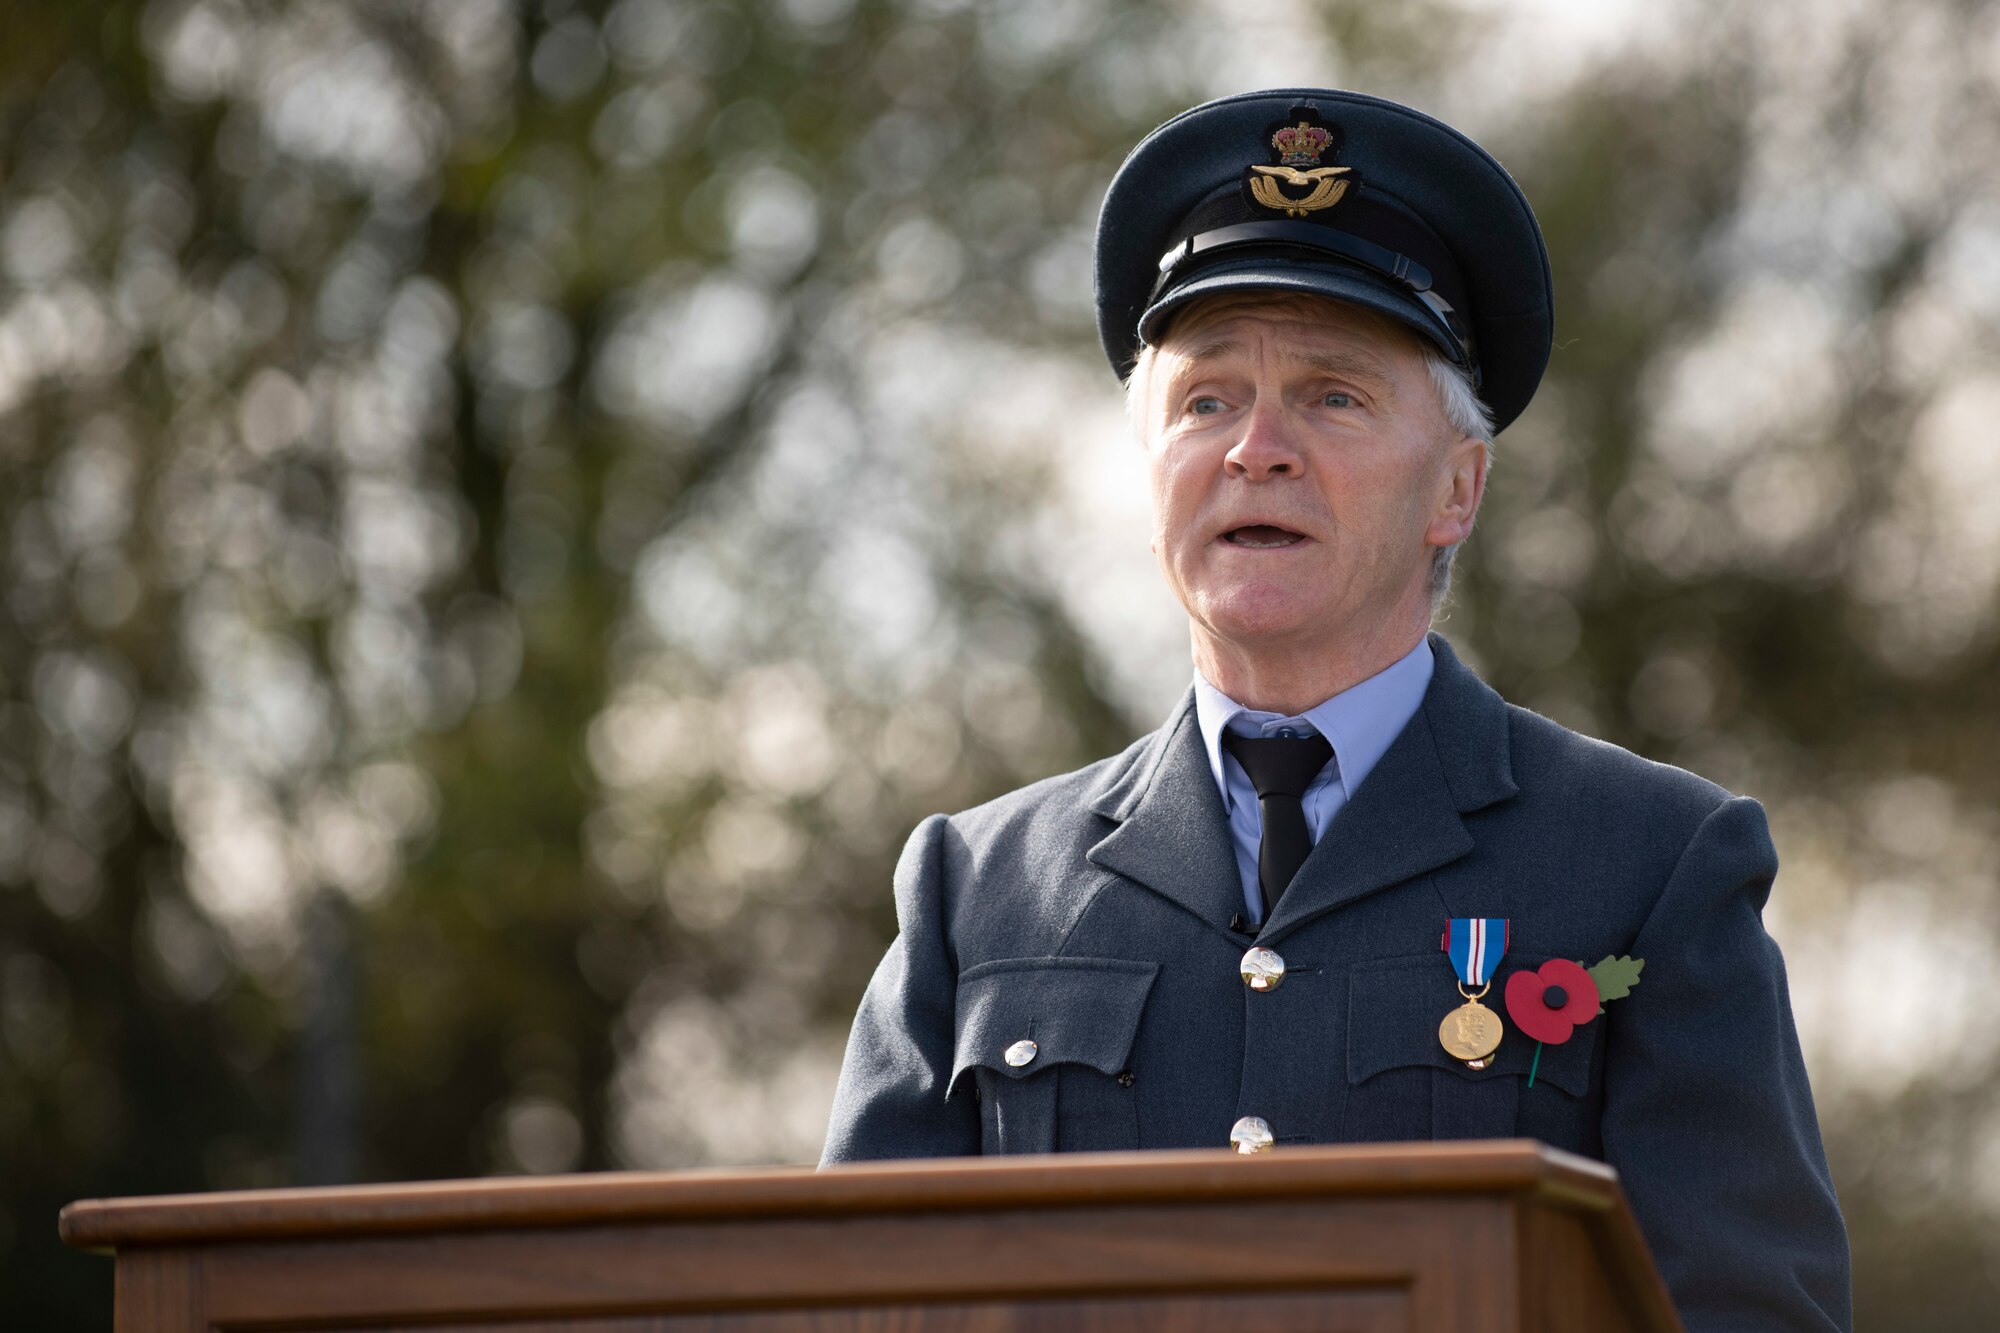 Royal Air Force Sqn. Ldr. Clive Wood, RAF Alconbury and RAF Molesworth RAF commander, reads an excerpt from the poem “For the Fallen,” by Robert Laurence Binyon, during a Remembrance Sunday ceremony near the 303rd Bombardment Group monument at RAF Molesworth, England, Nov. 3, 2020. Remembrance Sunday is commemorated the second Sunday every November to honor the service and sacrifice of Armed Forces, British and Commonwealth veterans, as well as the Allies that fought alongside them in the two World Wars and later conflicts. (U.S. Air Force photo by Senior Airman Jennifer Zima)